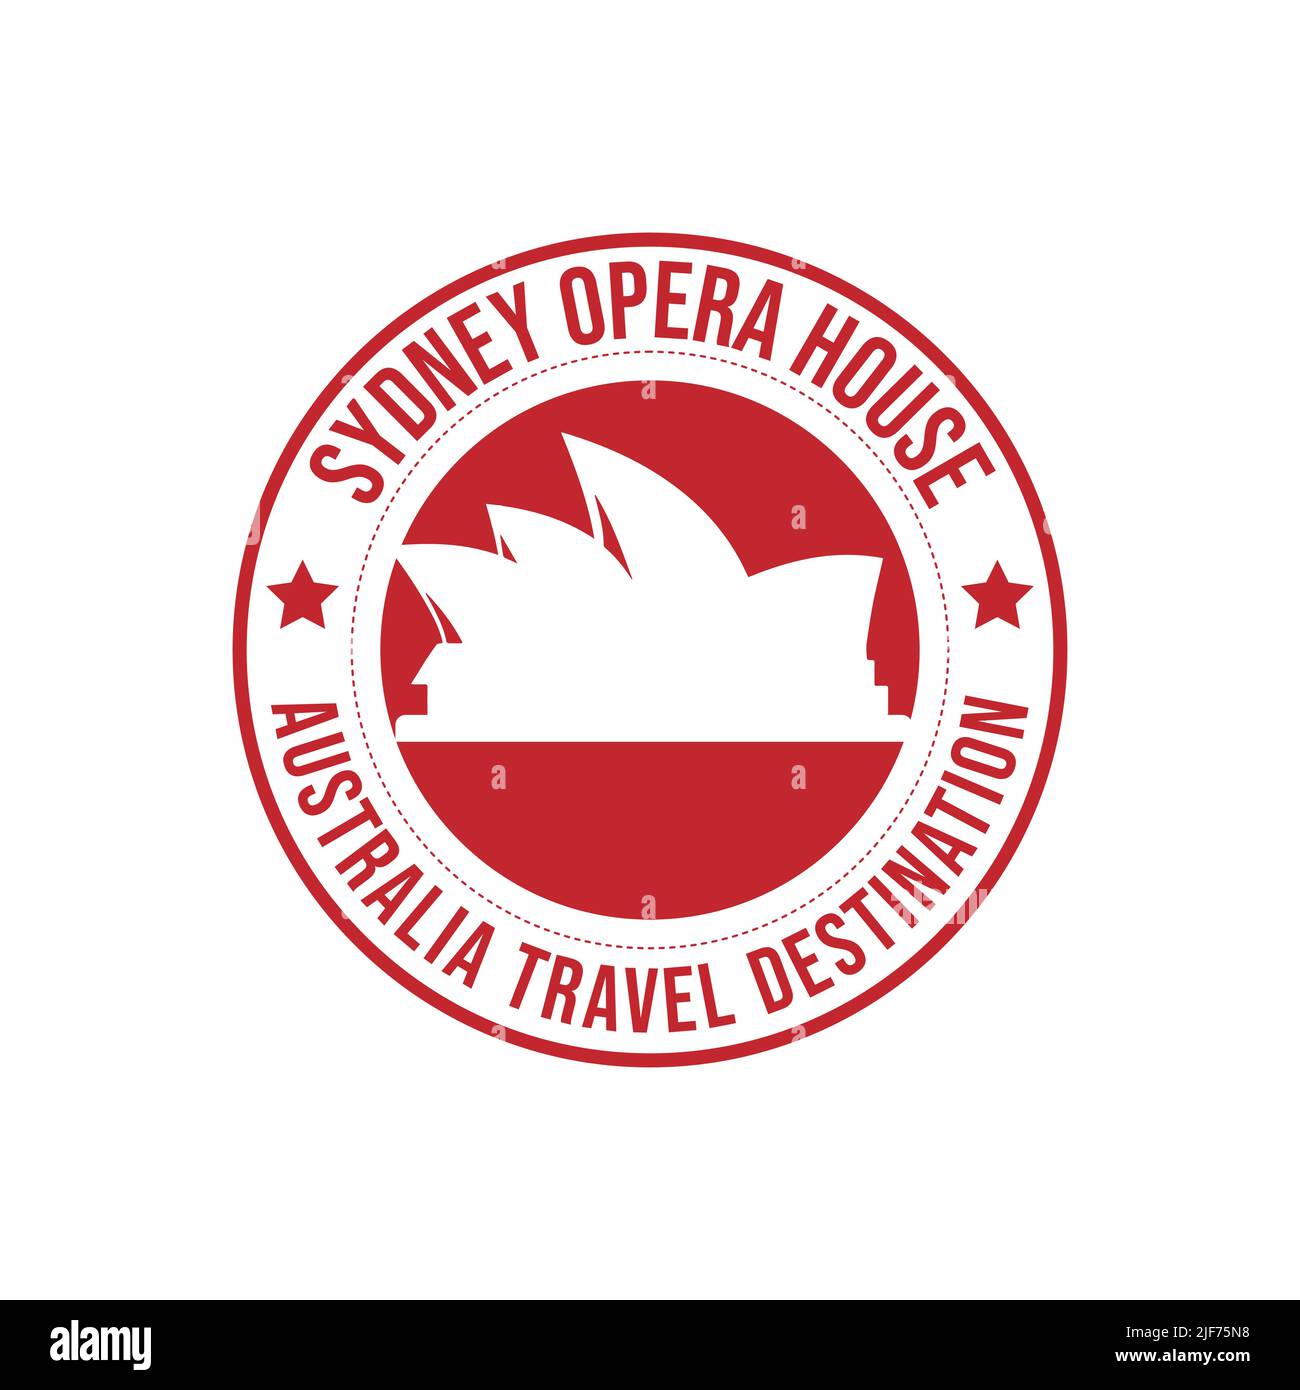 Badge rubber stamp with the text Sydney opera house travel destination written inside the stamp. Time to travel. Australia modern architecture travel Stock Vector